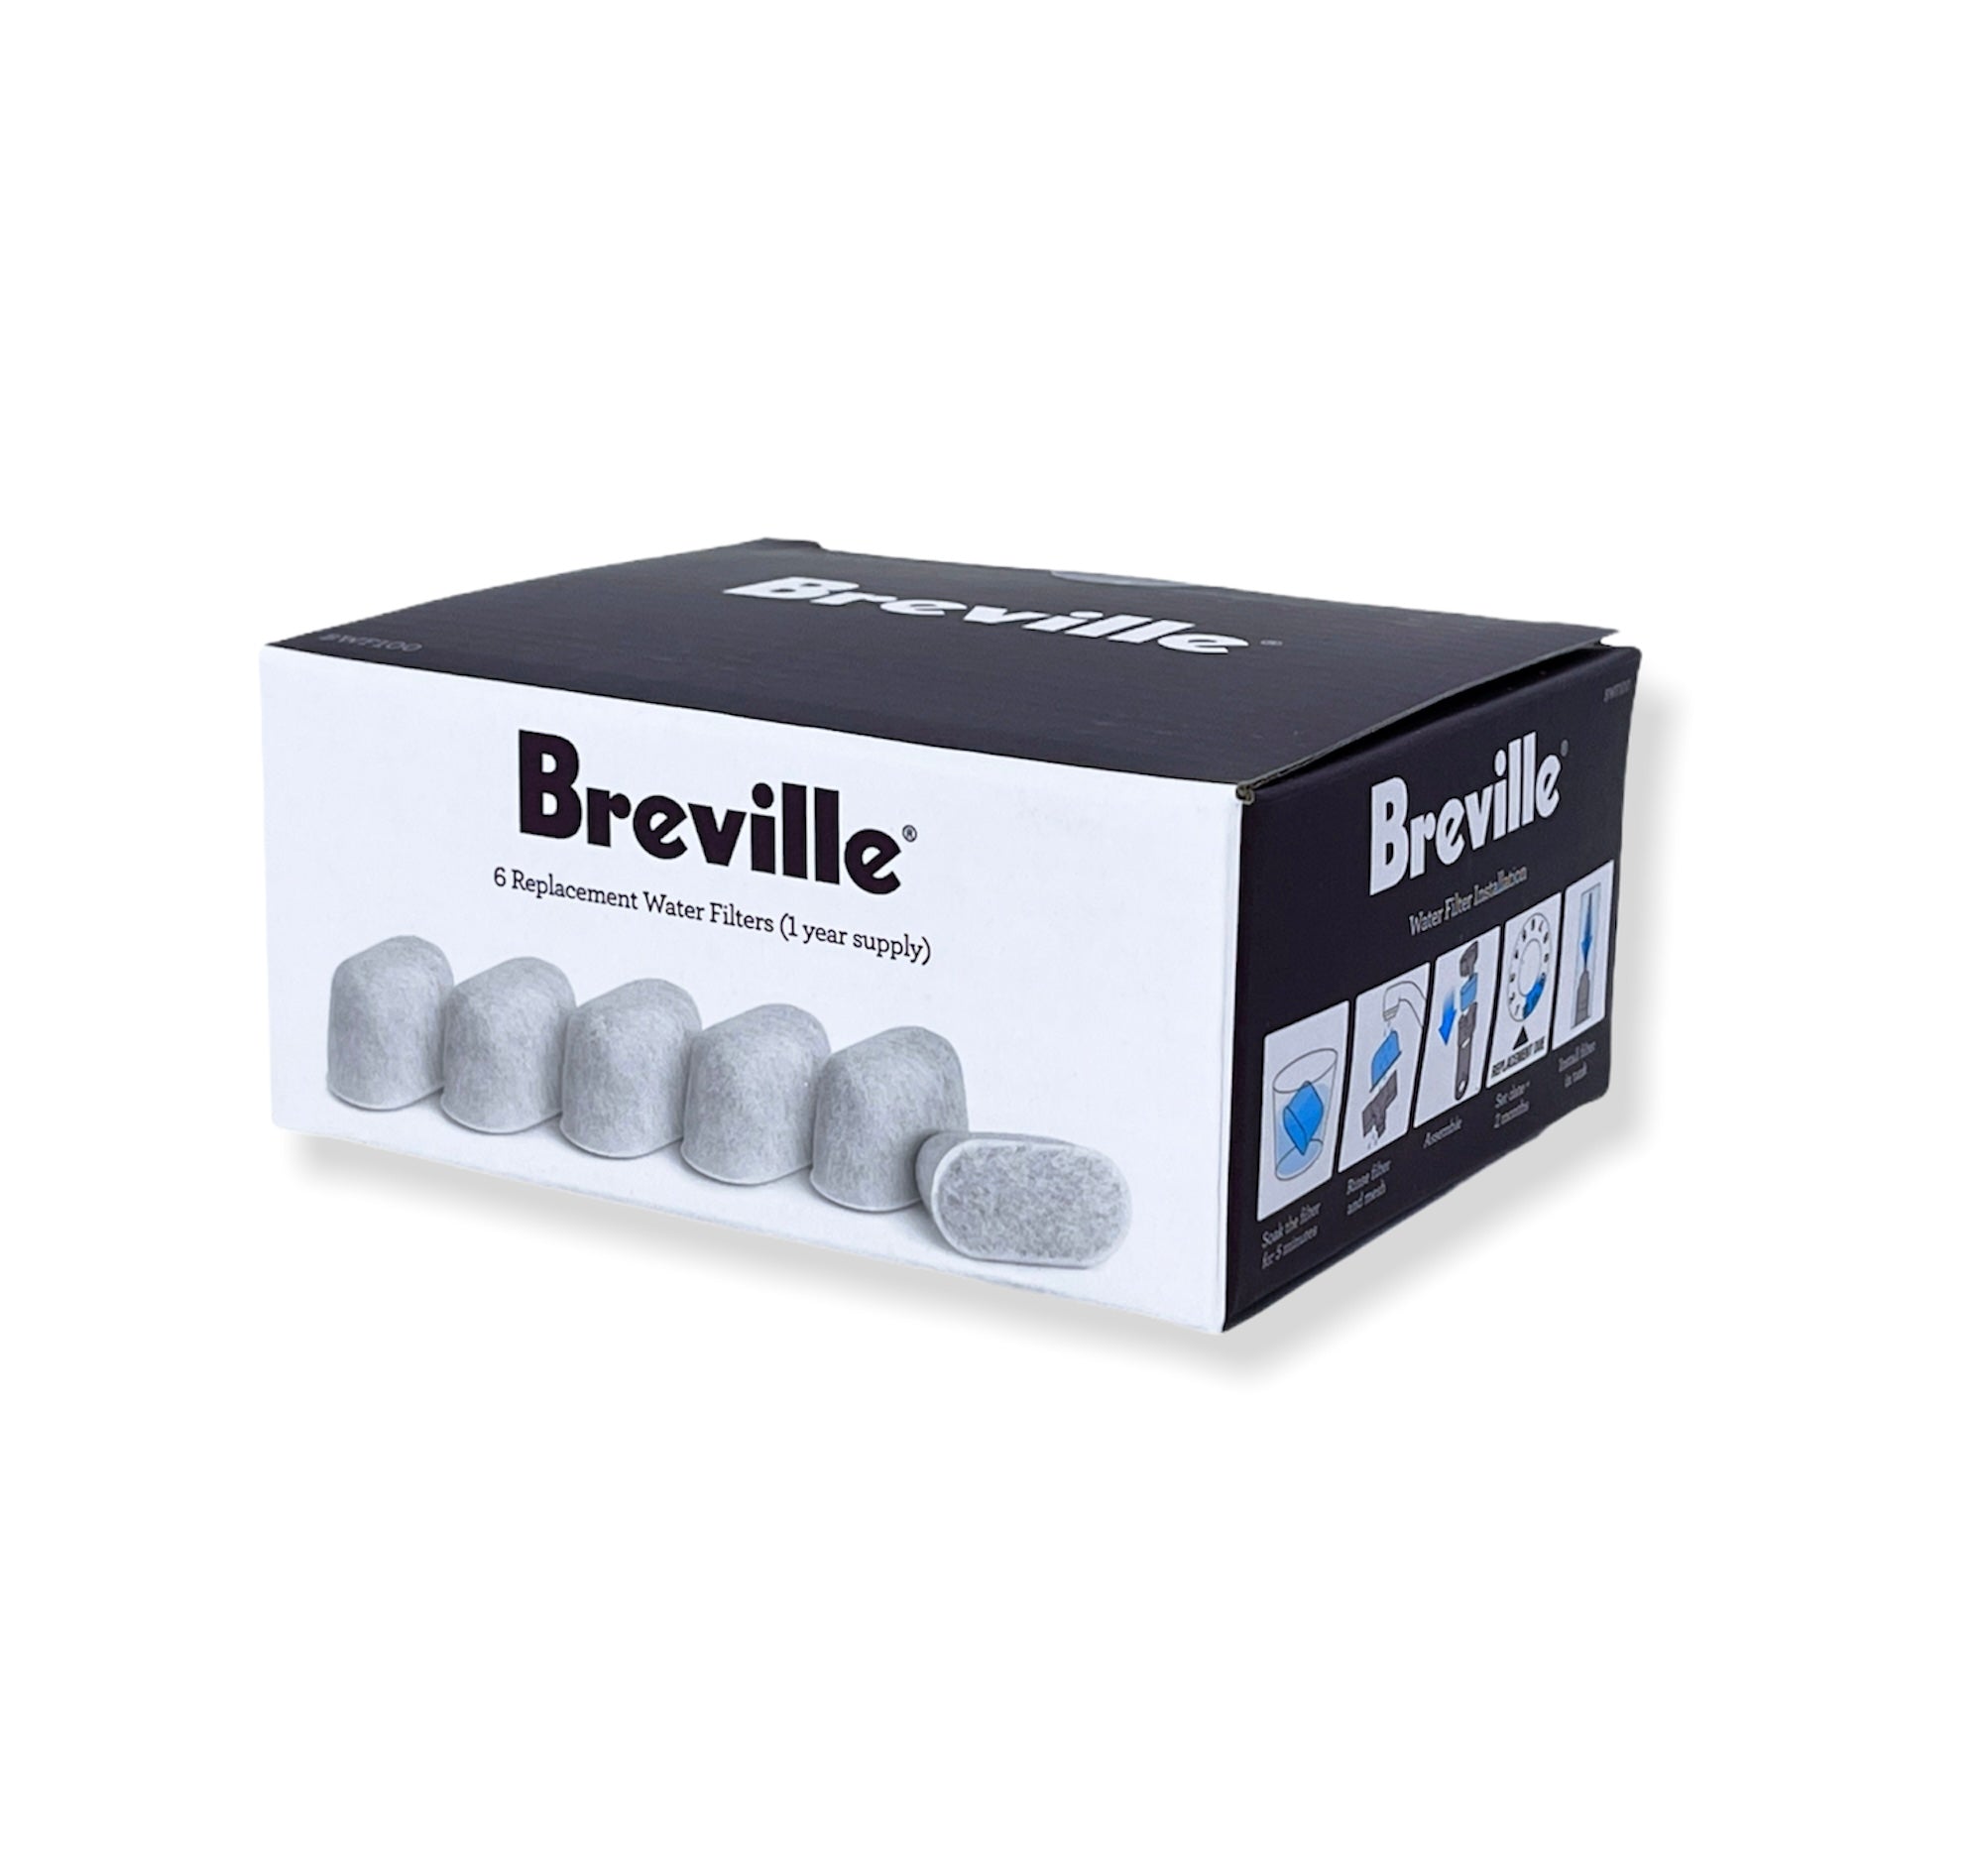 BREVILLE Replacement Water Filters (6 filters per box)